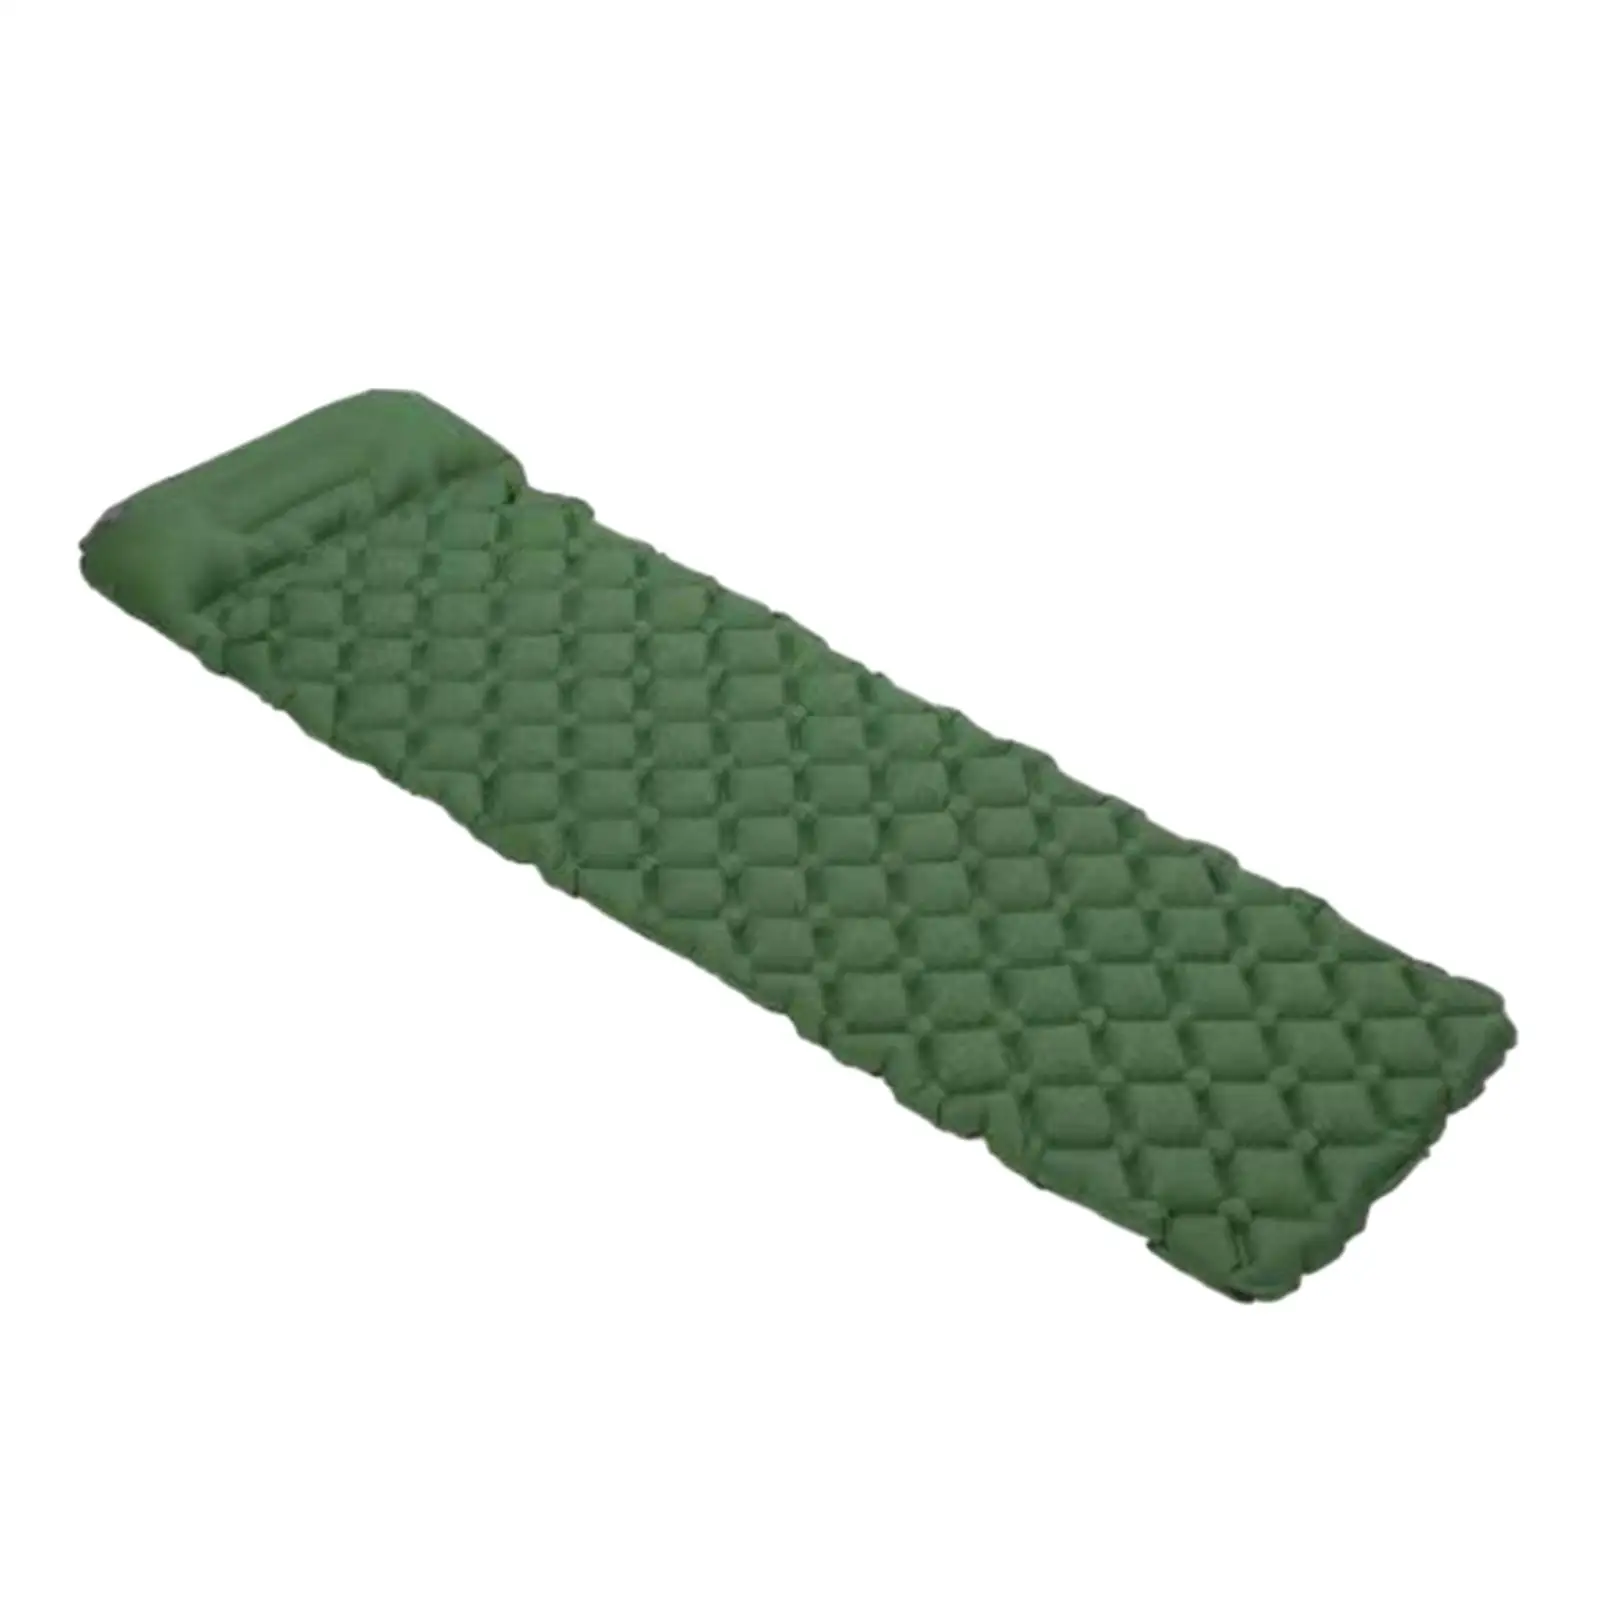 Camping Sleeping Pad Inflatable Sleeping Pads Camping Mat Portable Ultralight for Outdoor Tent Backpacking Traveling Hiking